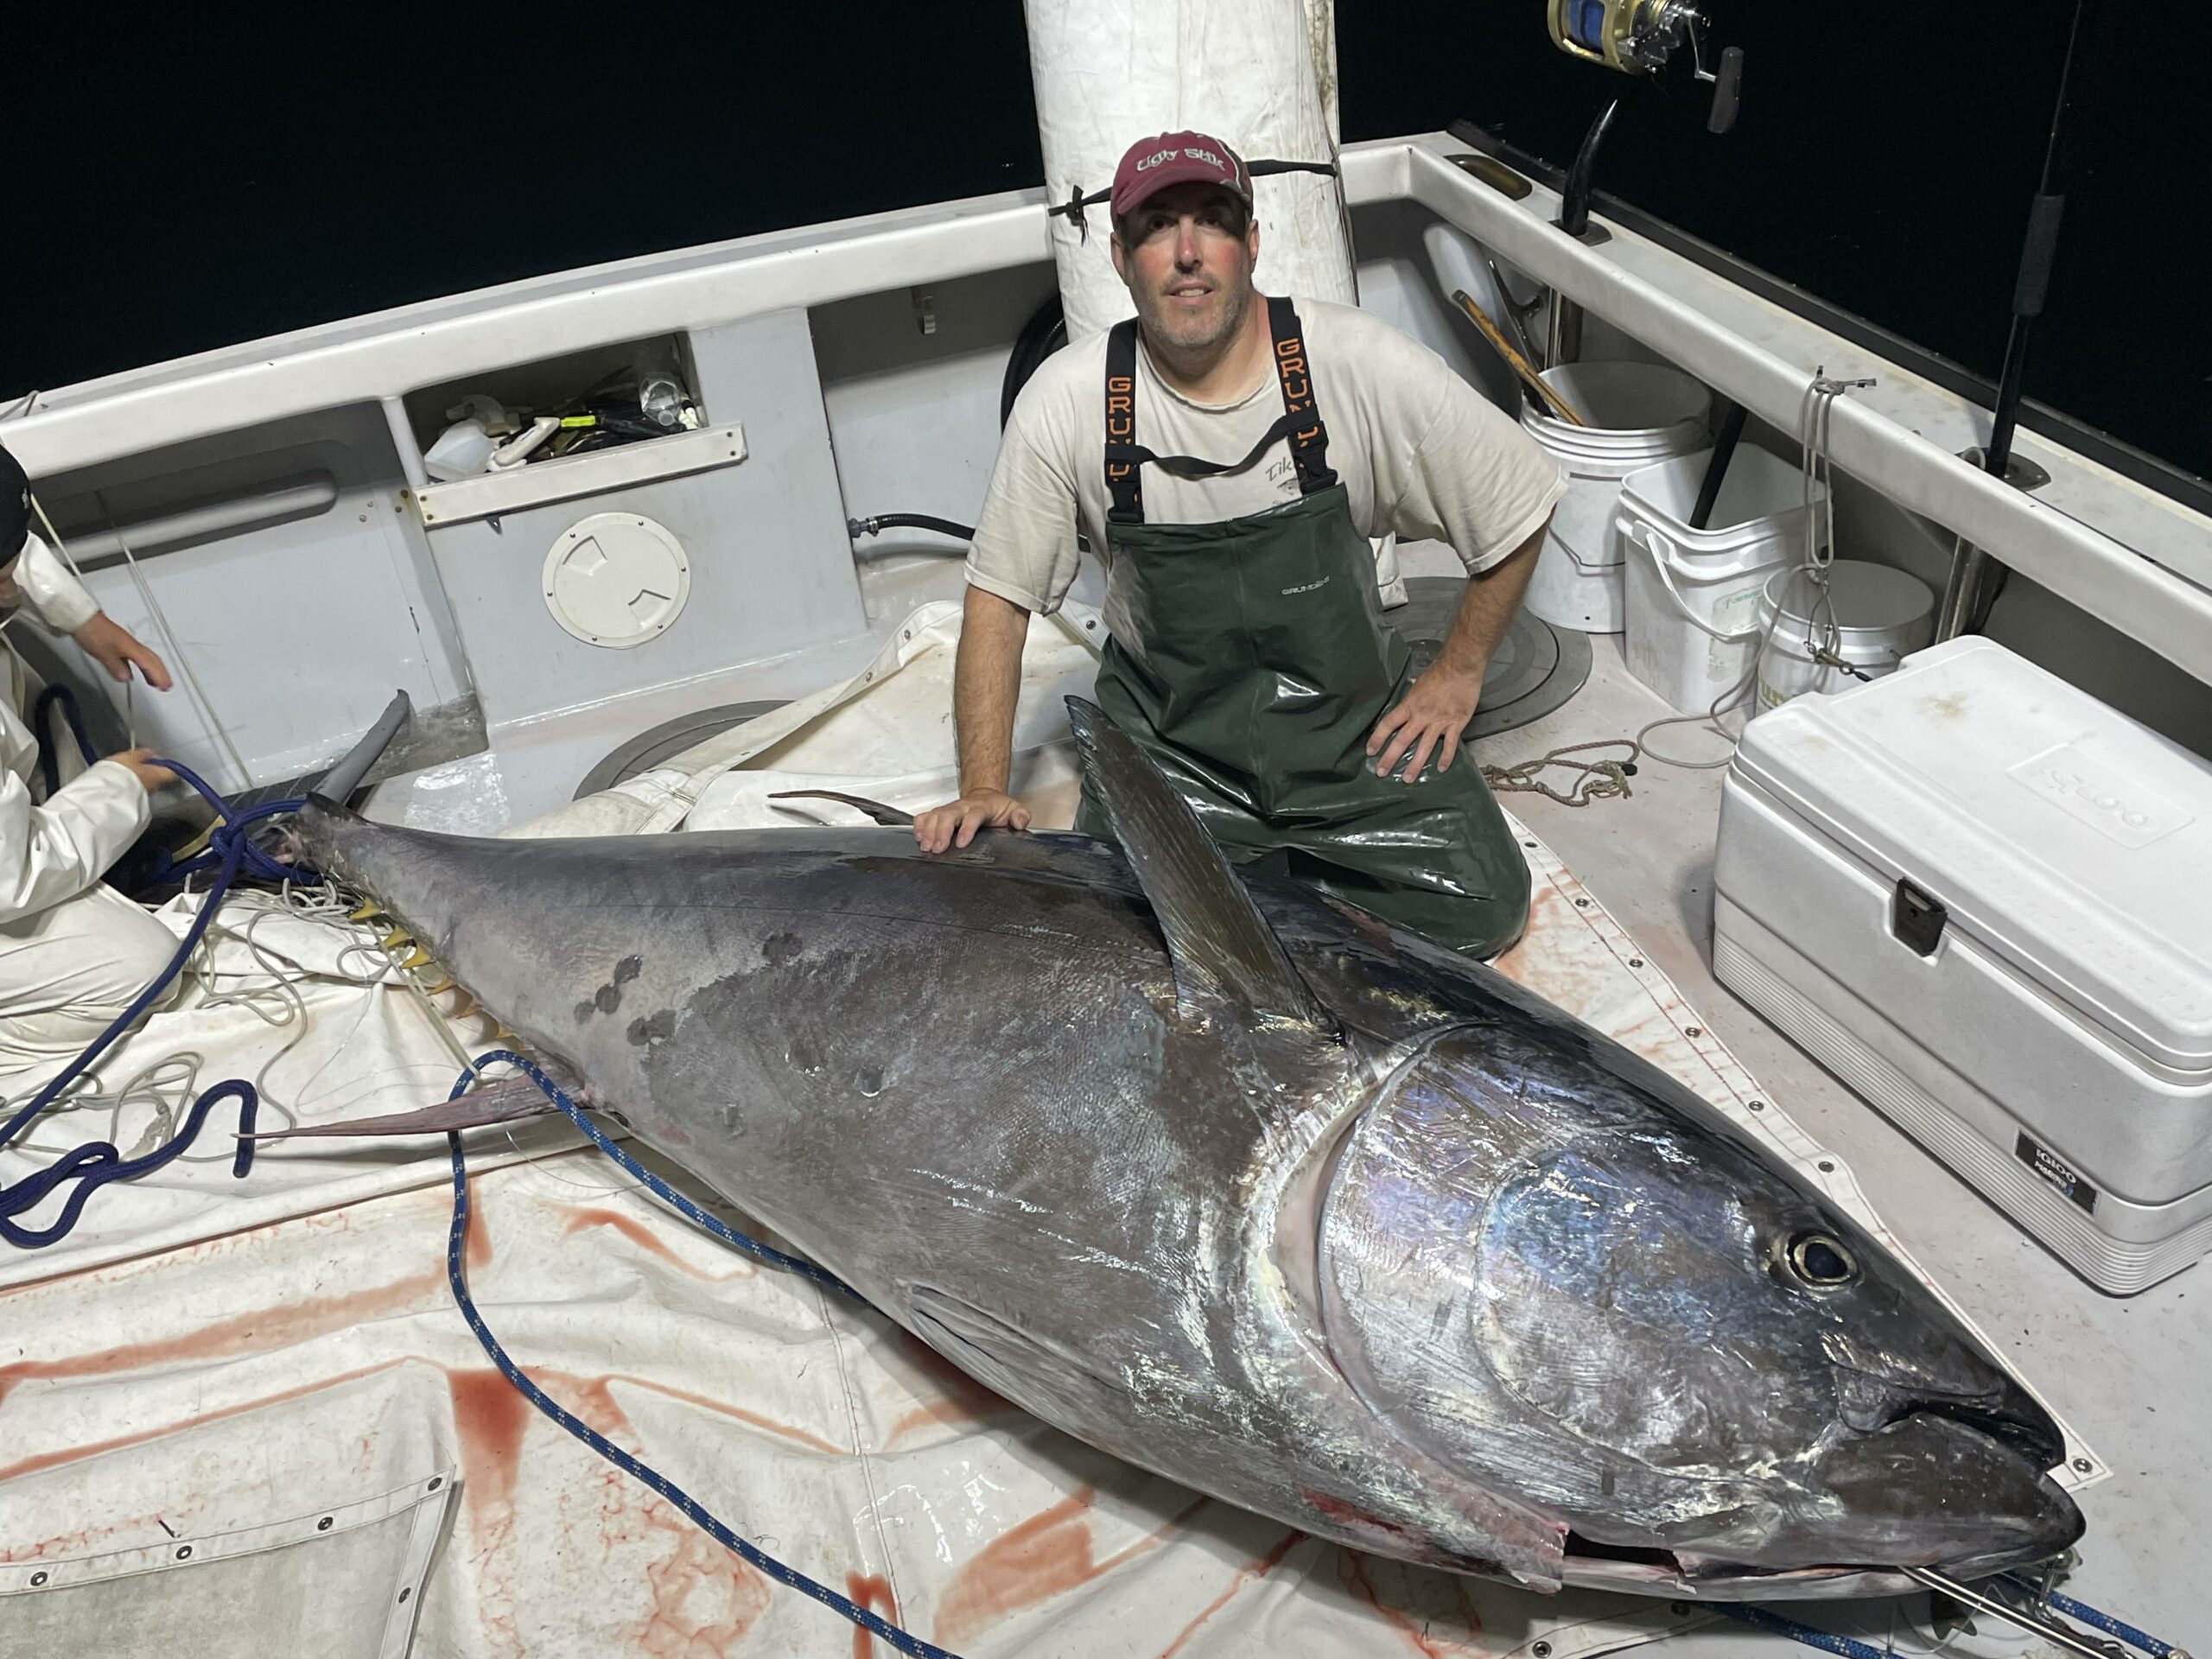 New Jersey Fisherman Breaks 38-Year-Old Record With Giant Albacore Catch